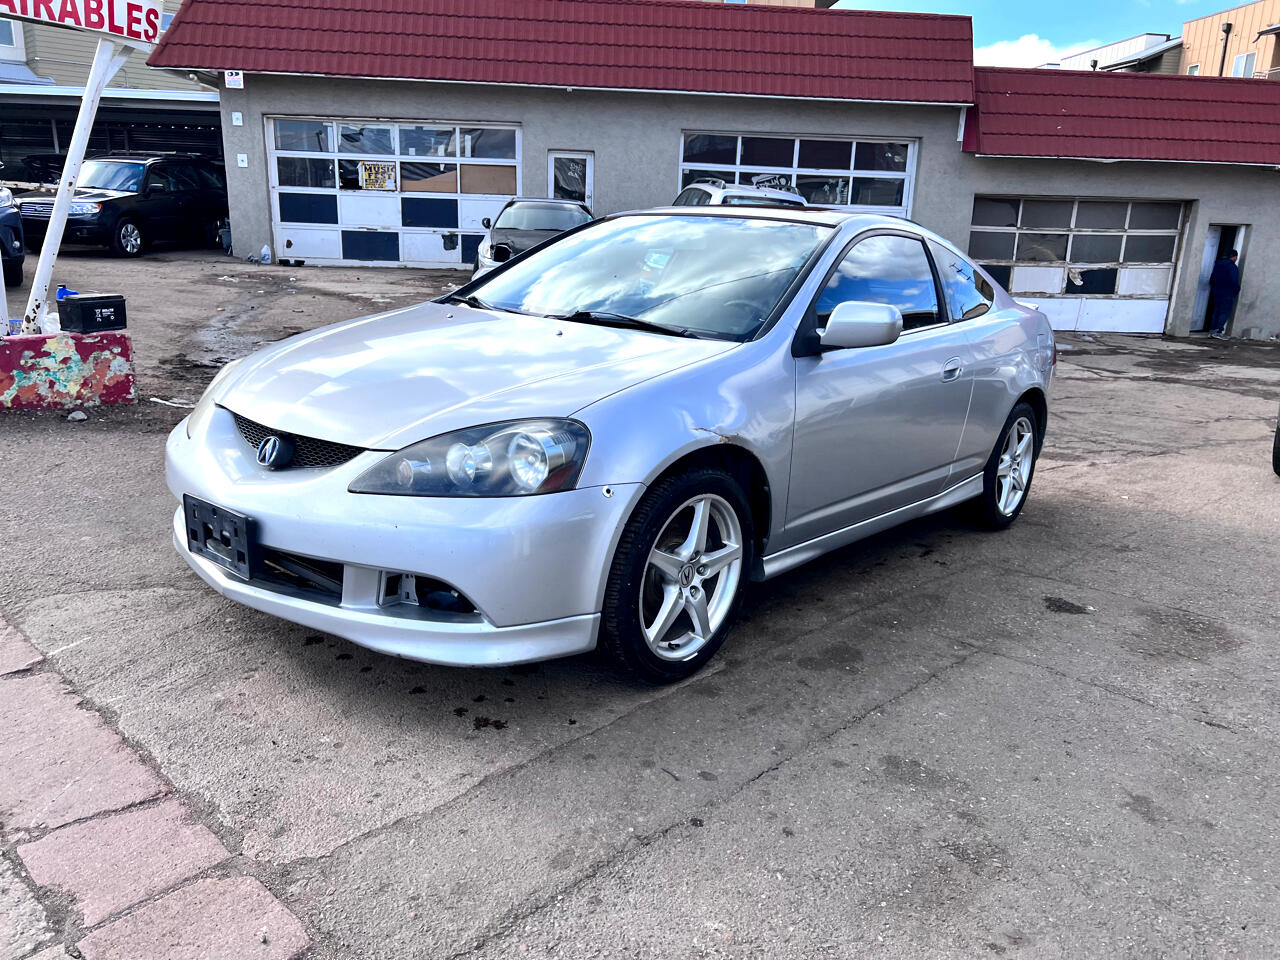 2005 Acura RSX 2dr Cpe Type-S 6-spd MT Leather